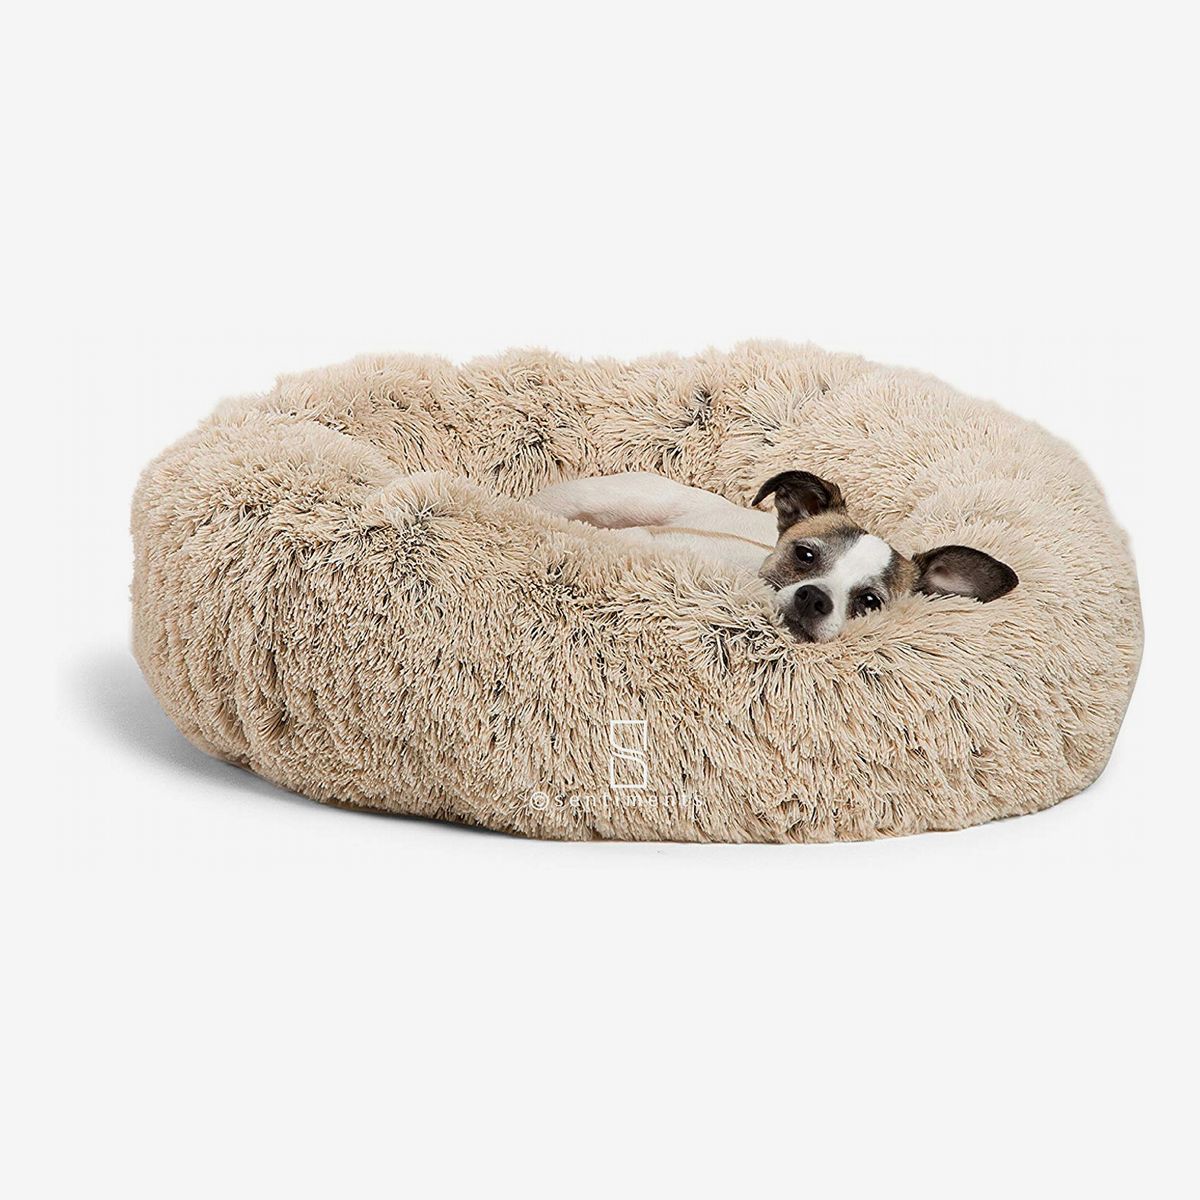 10 Very Best Dog Beds 2022 | The Strategist